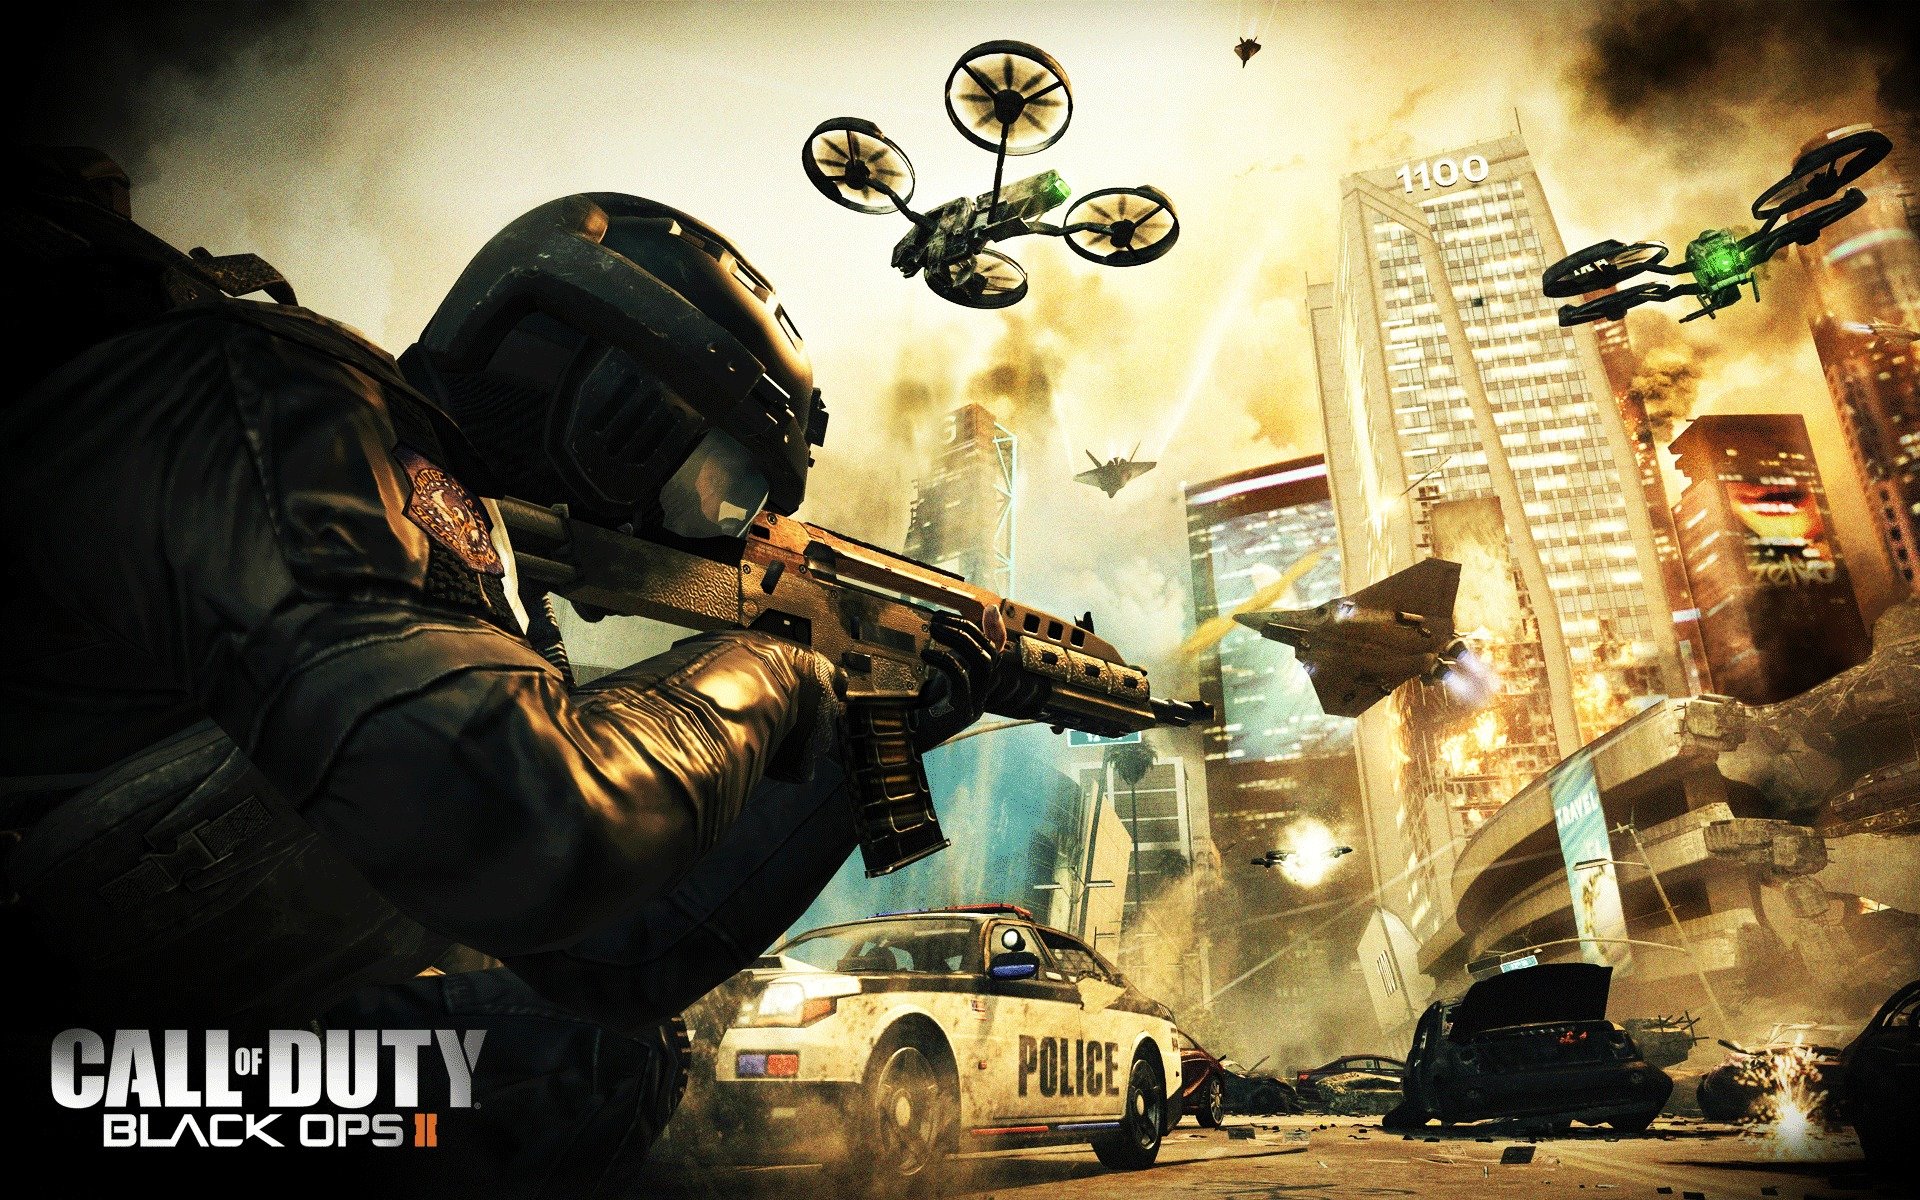 7. Call of Duty: Black Ops 2